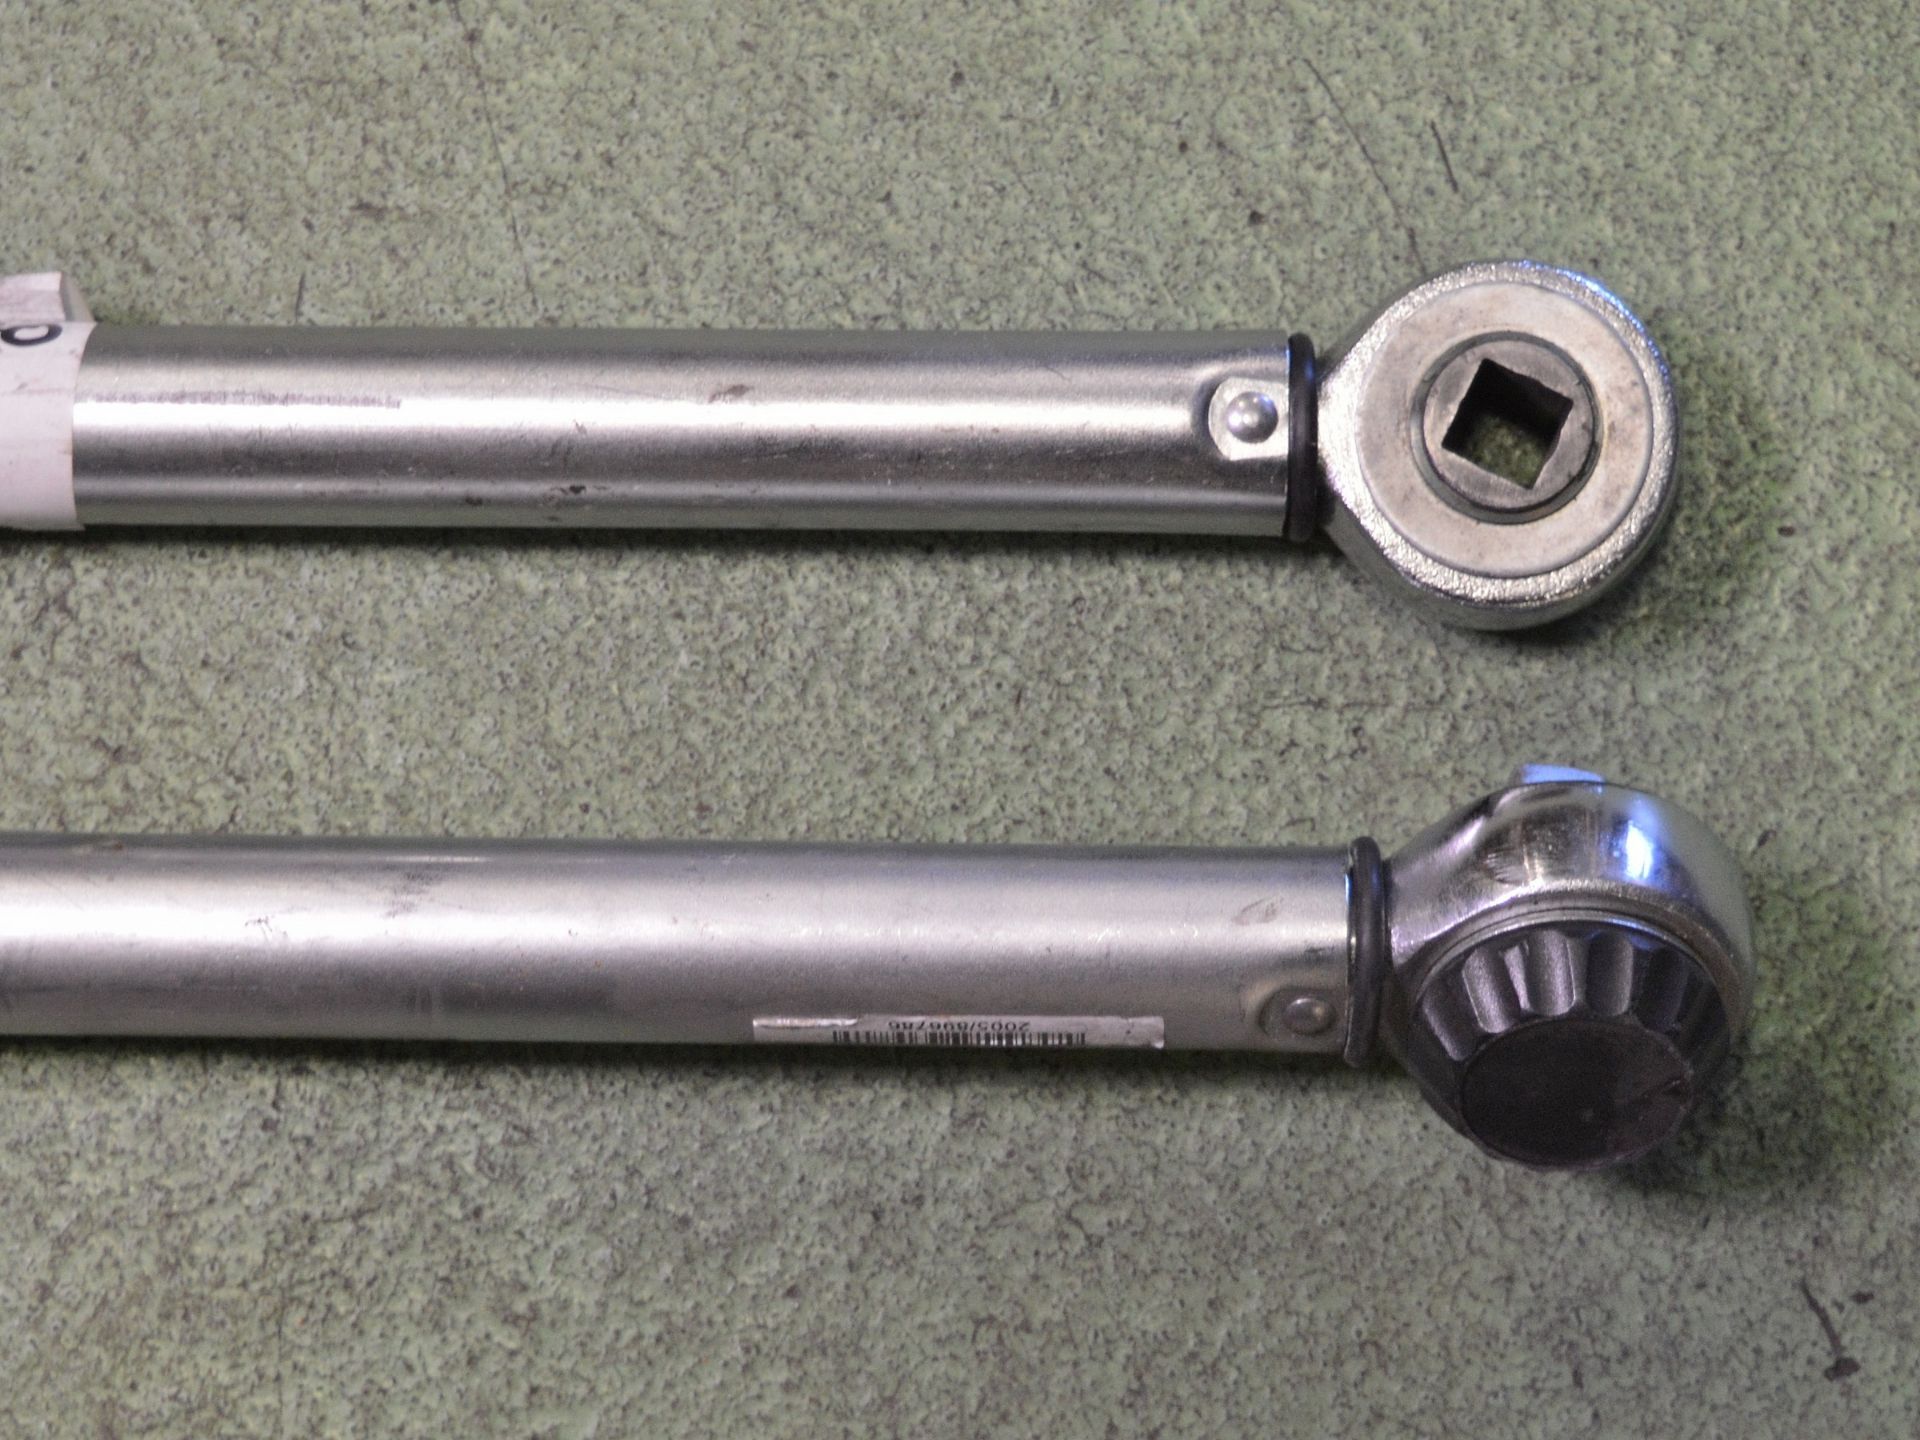 2x Norbar Torque Wrenches - Image 2 of 2